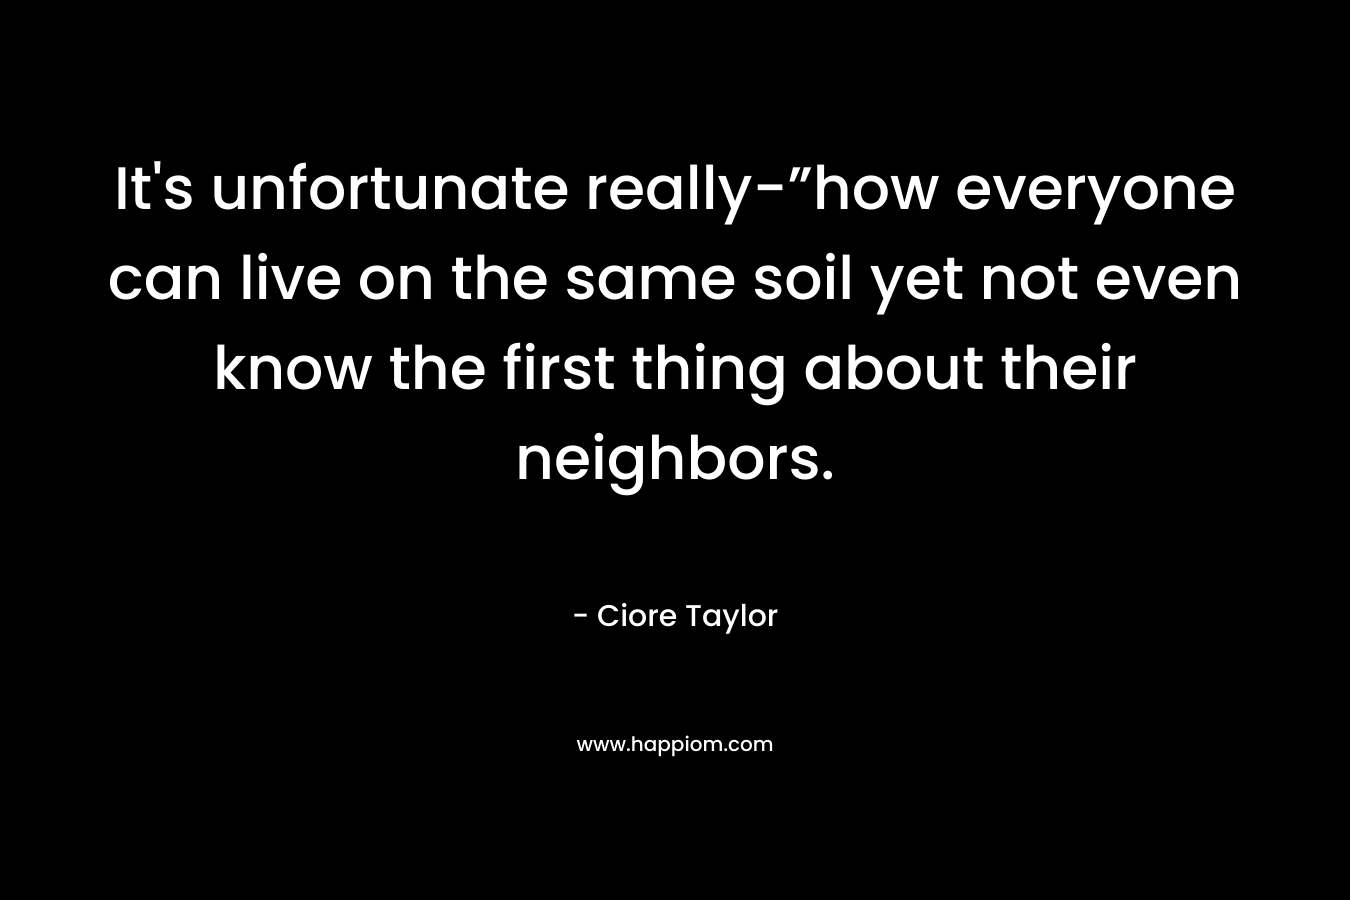 It's unfortunate really-”how everyone can live on the same soil yet not even know the first thing about their neighbors.